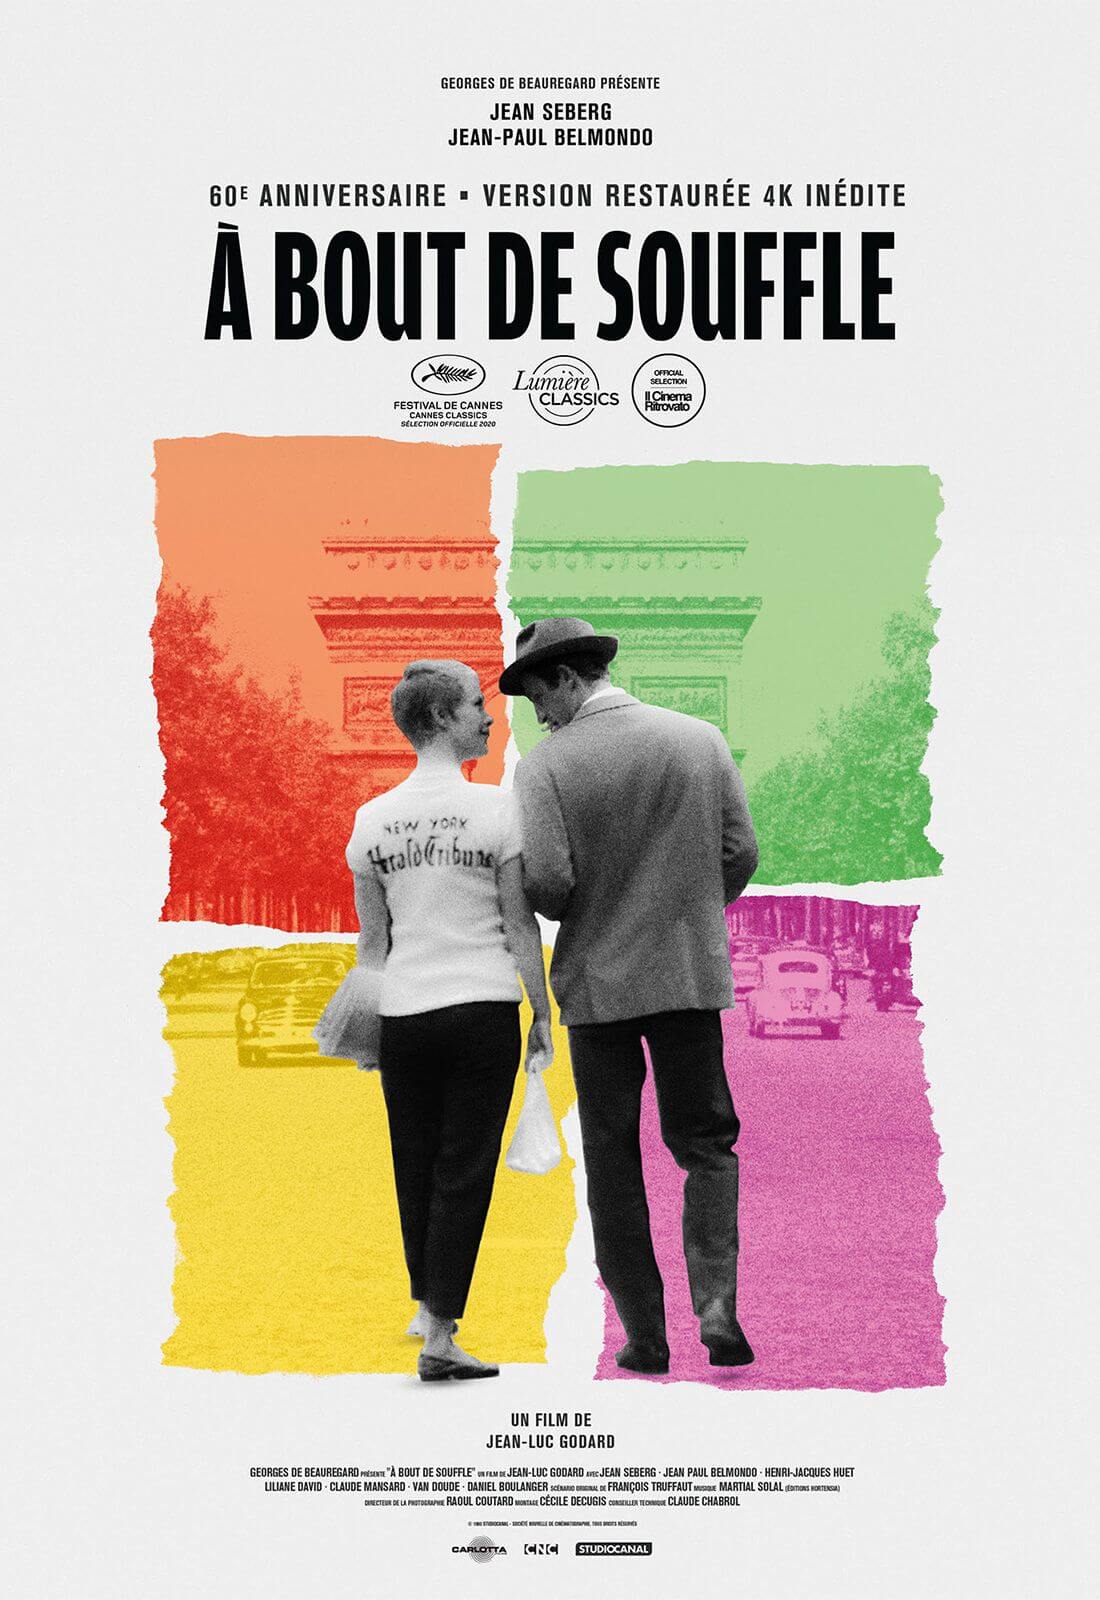 Breathless (A Bout De Souffle) - Jean-Luc Godard - French New Wave Cinema  50th Anniversary Poster - Posters